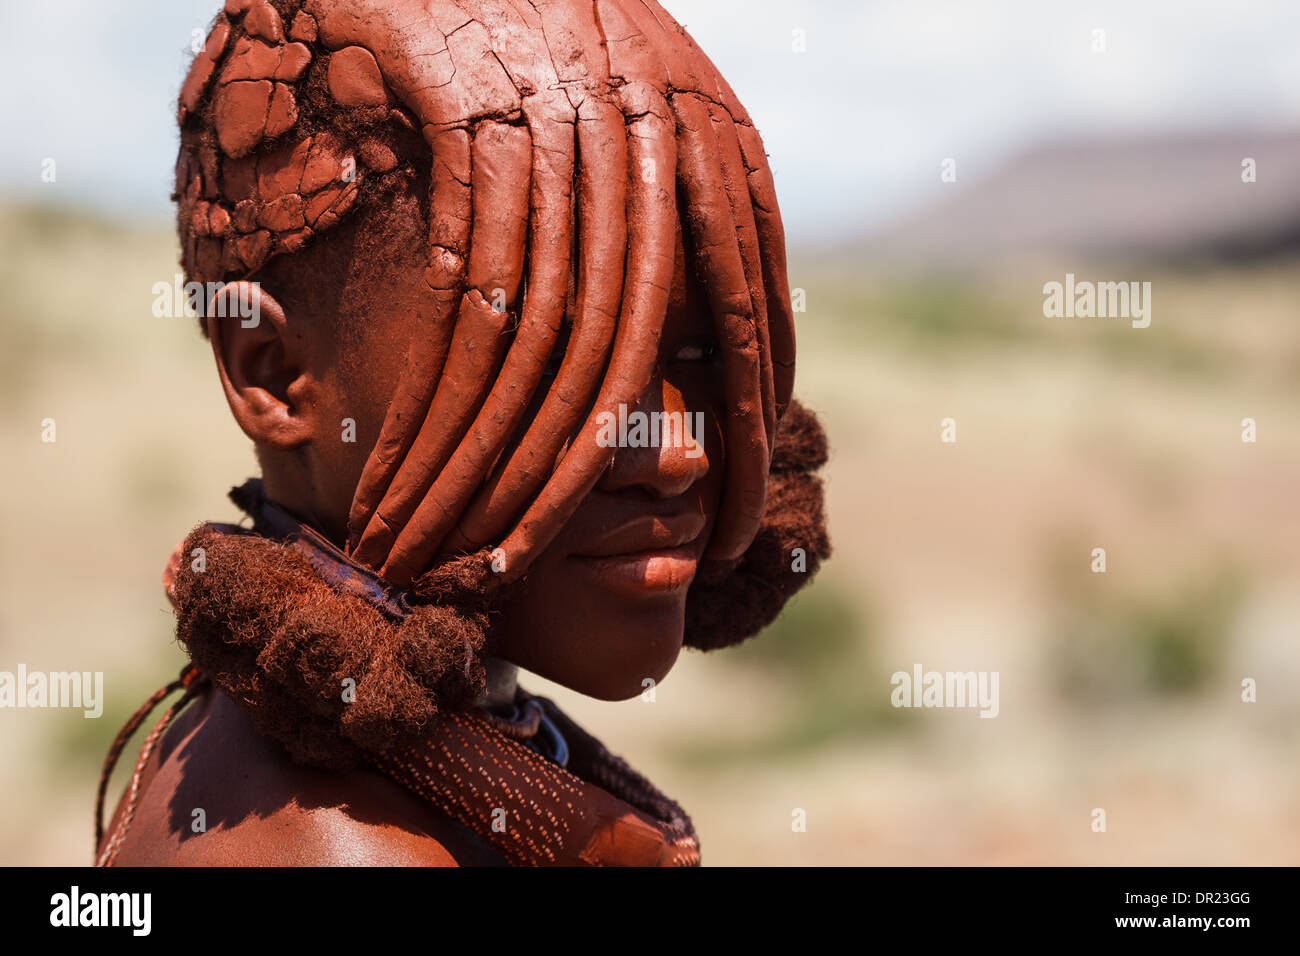 portrait-of-himba-woman-with-traditional-mud-caked-hairstyle-covering-DR23GG.jpg